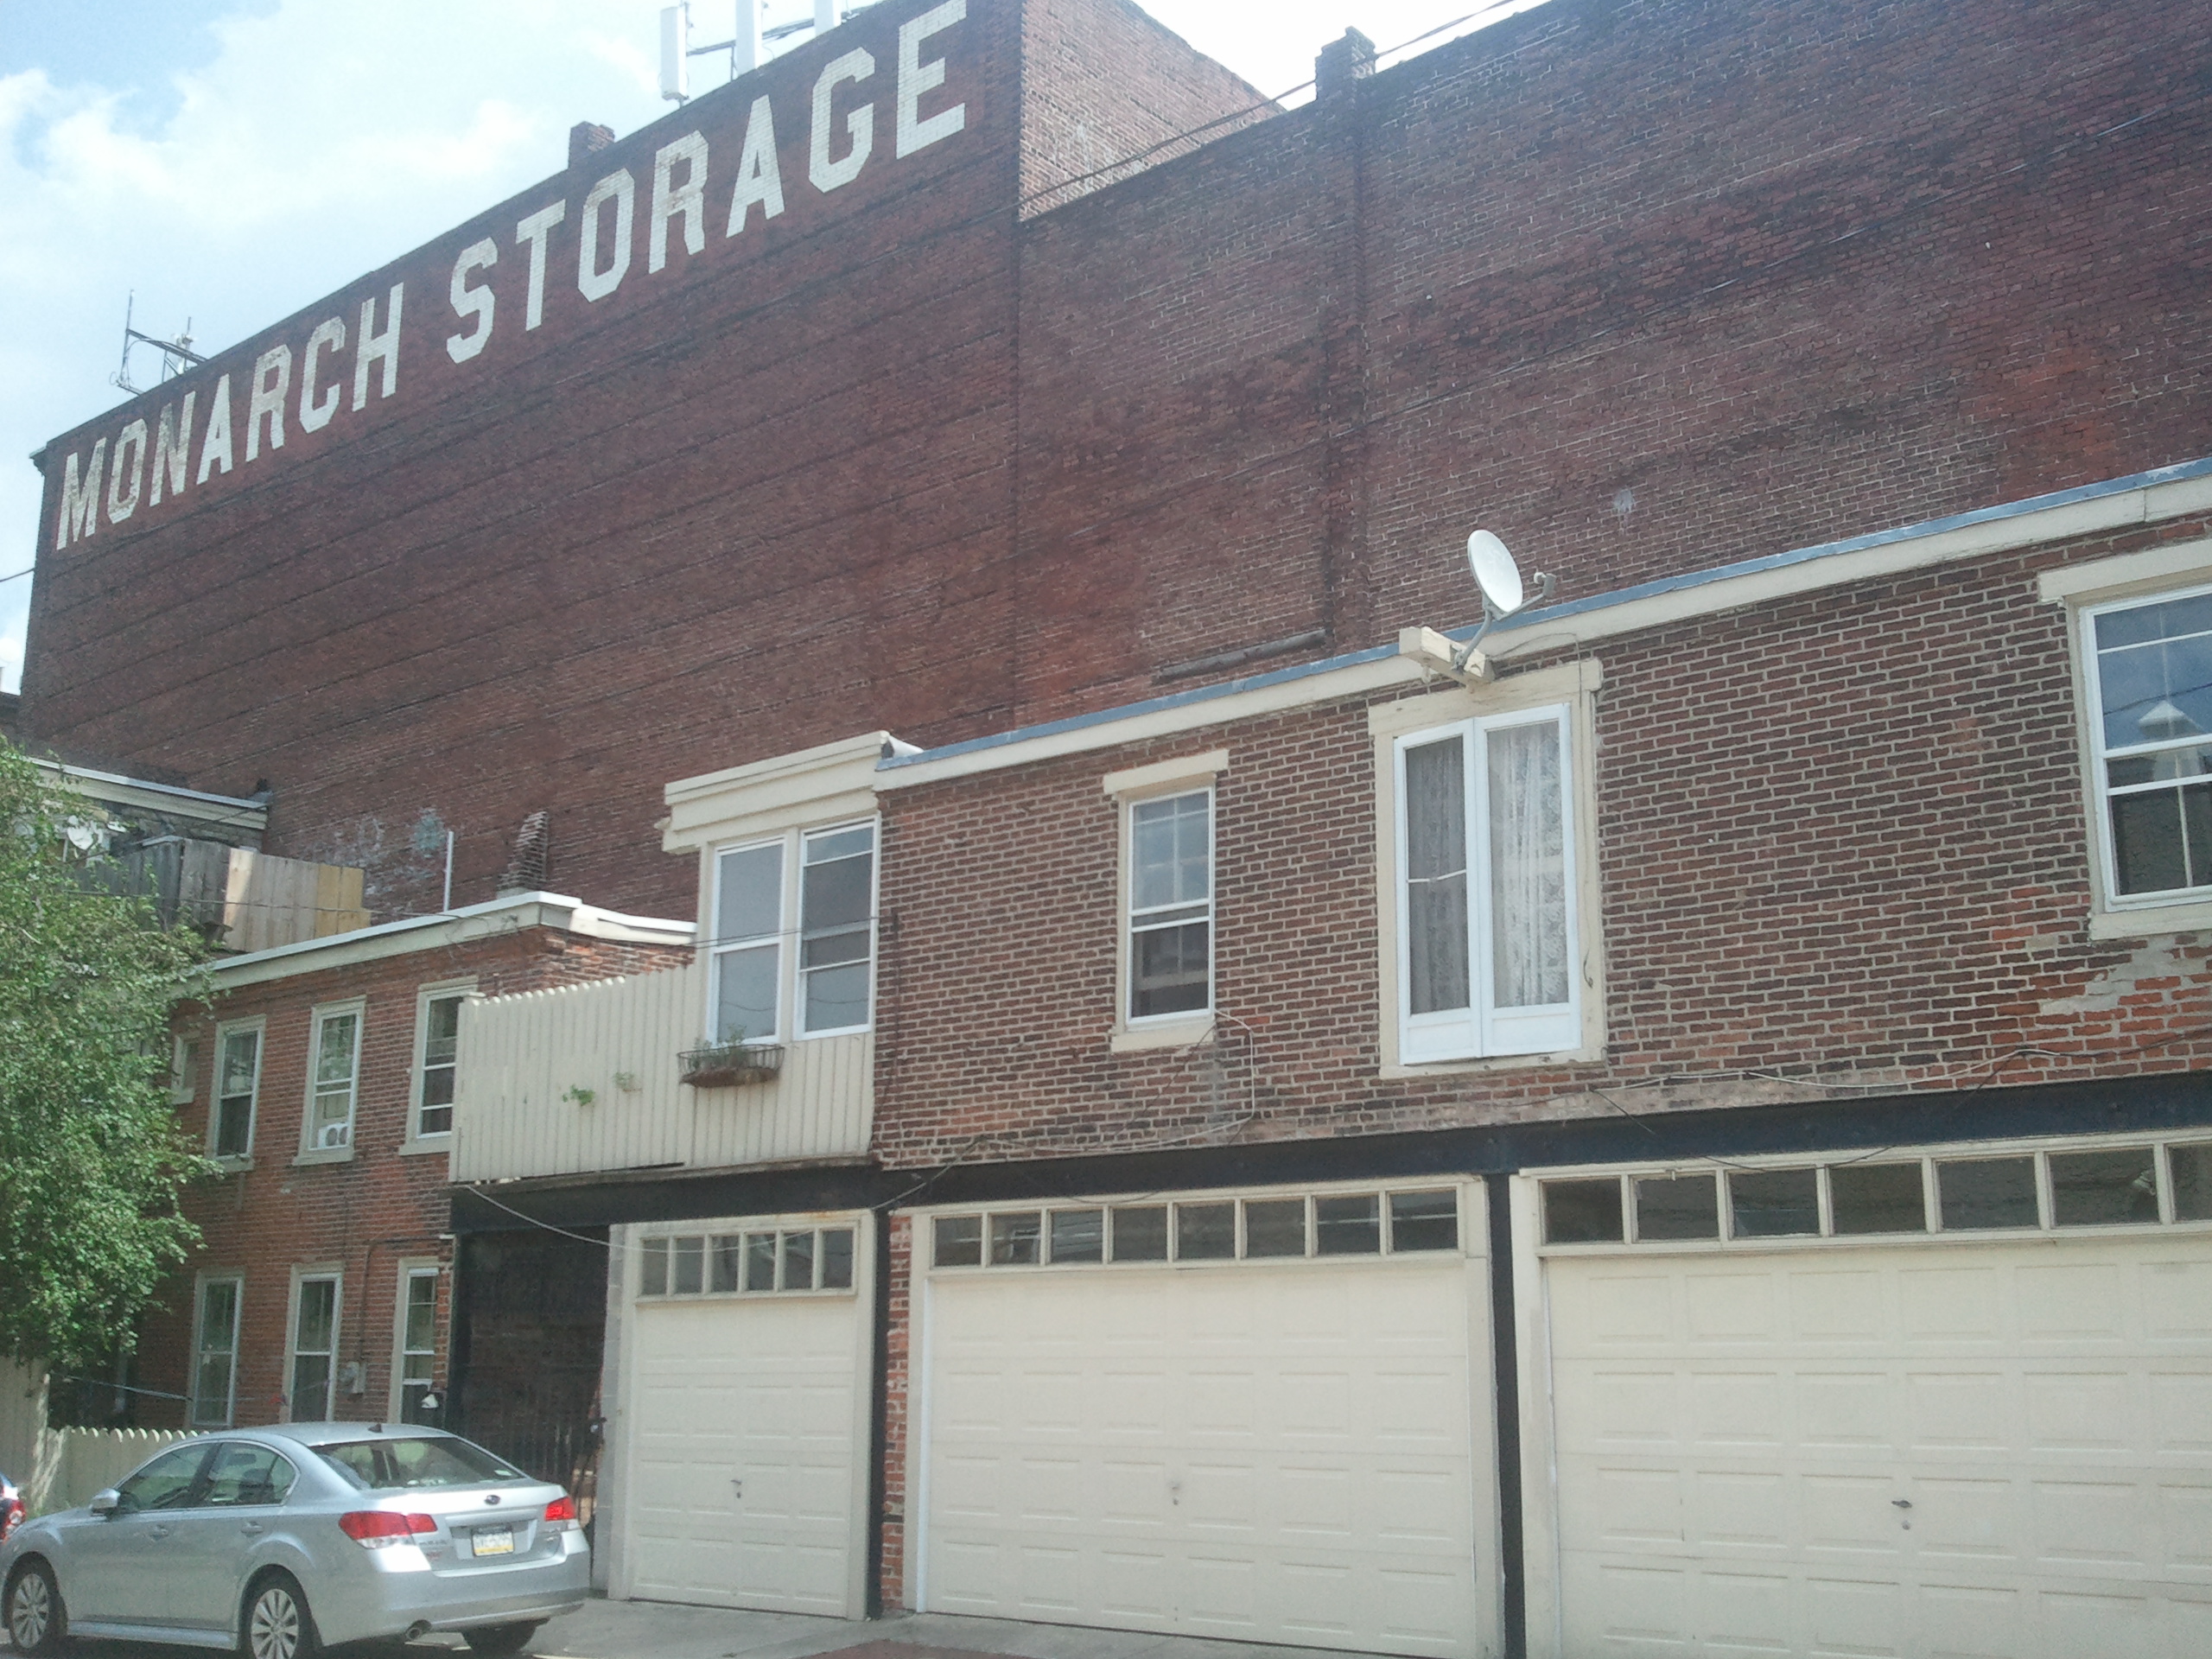 The former Monarch Storage building employed many in the neighborhood